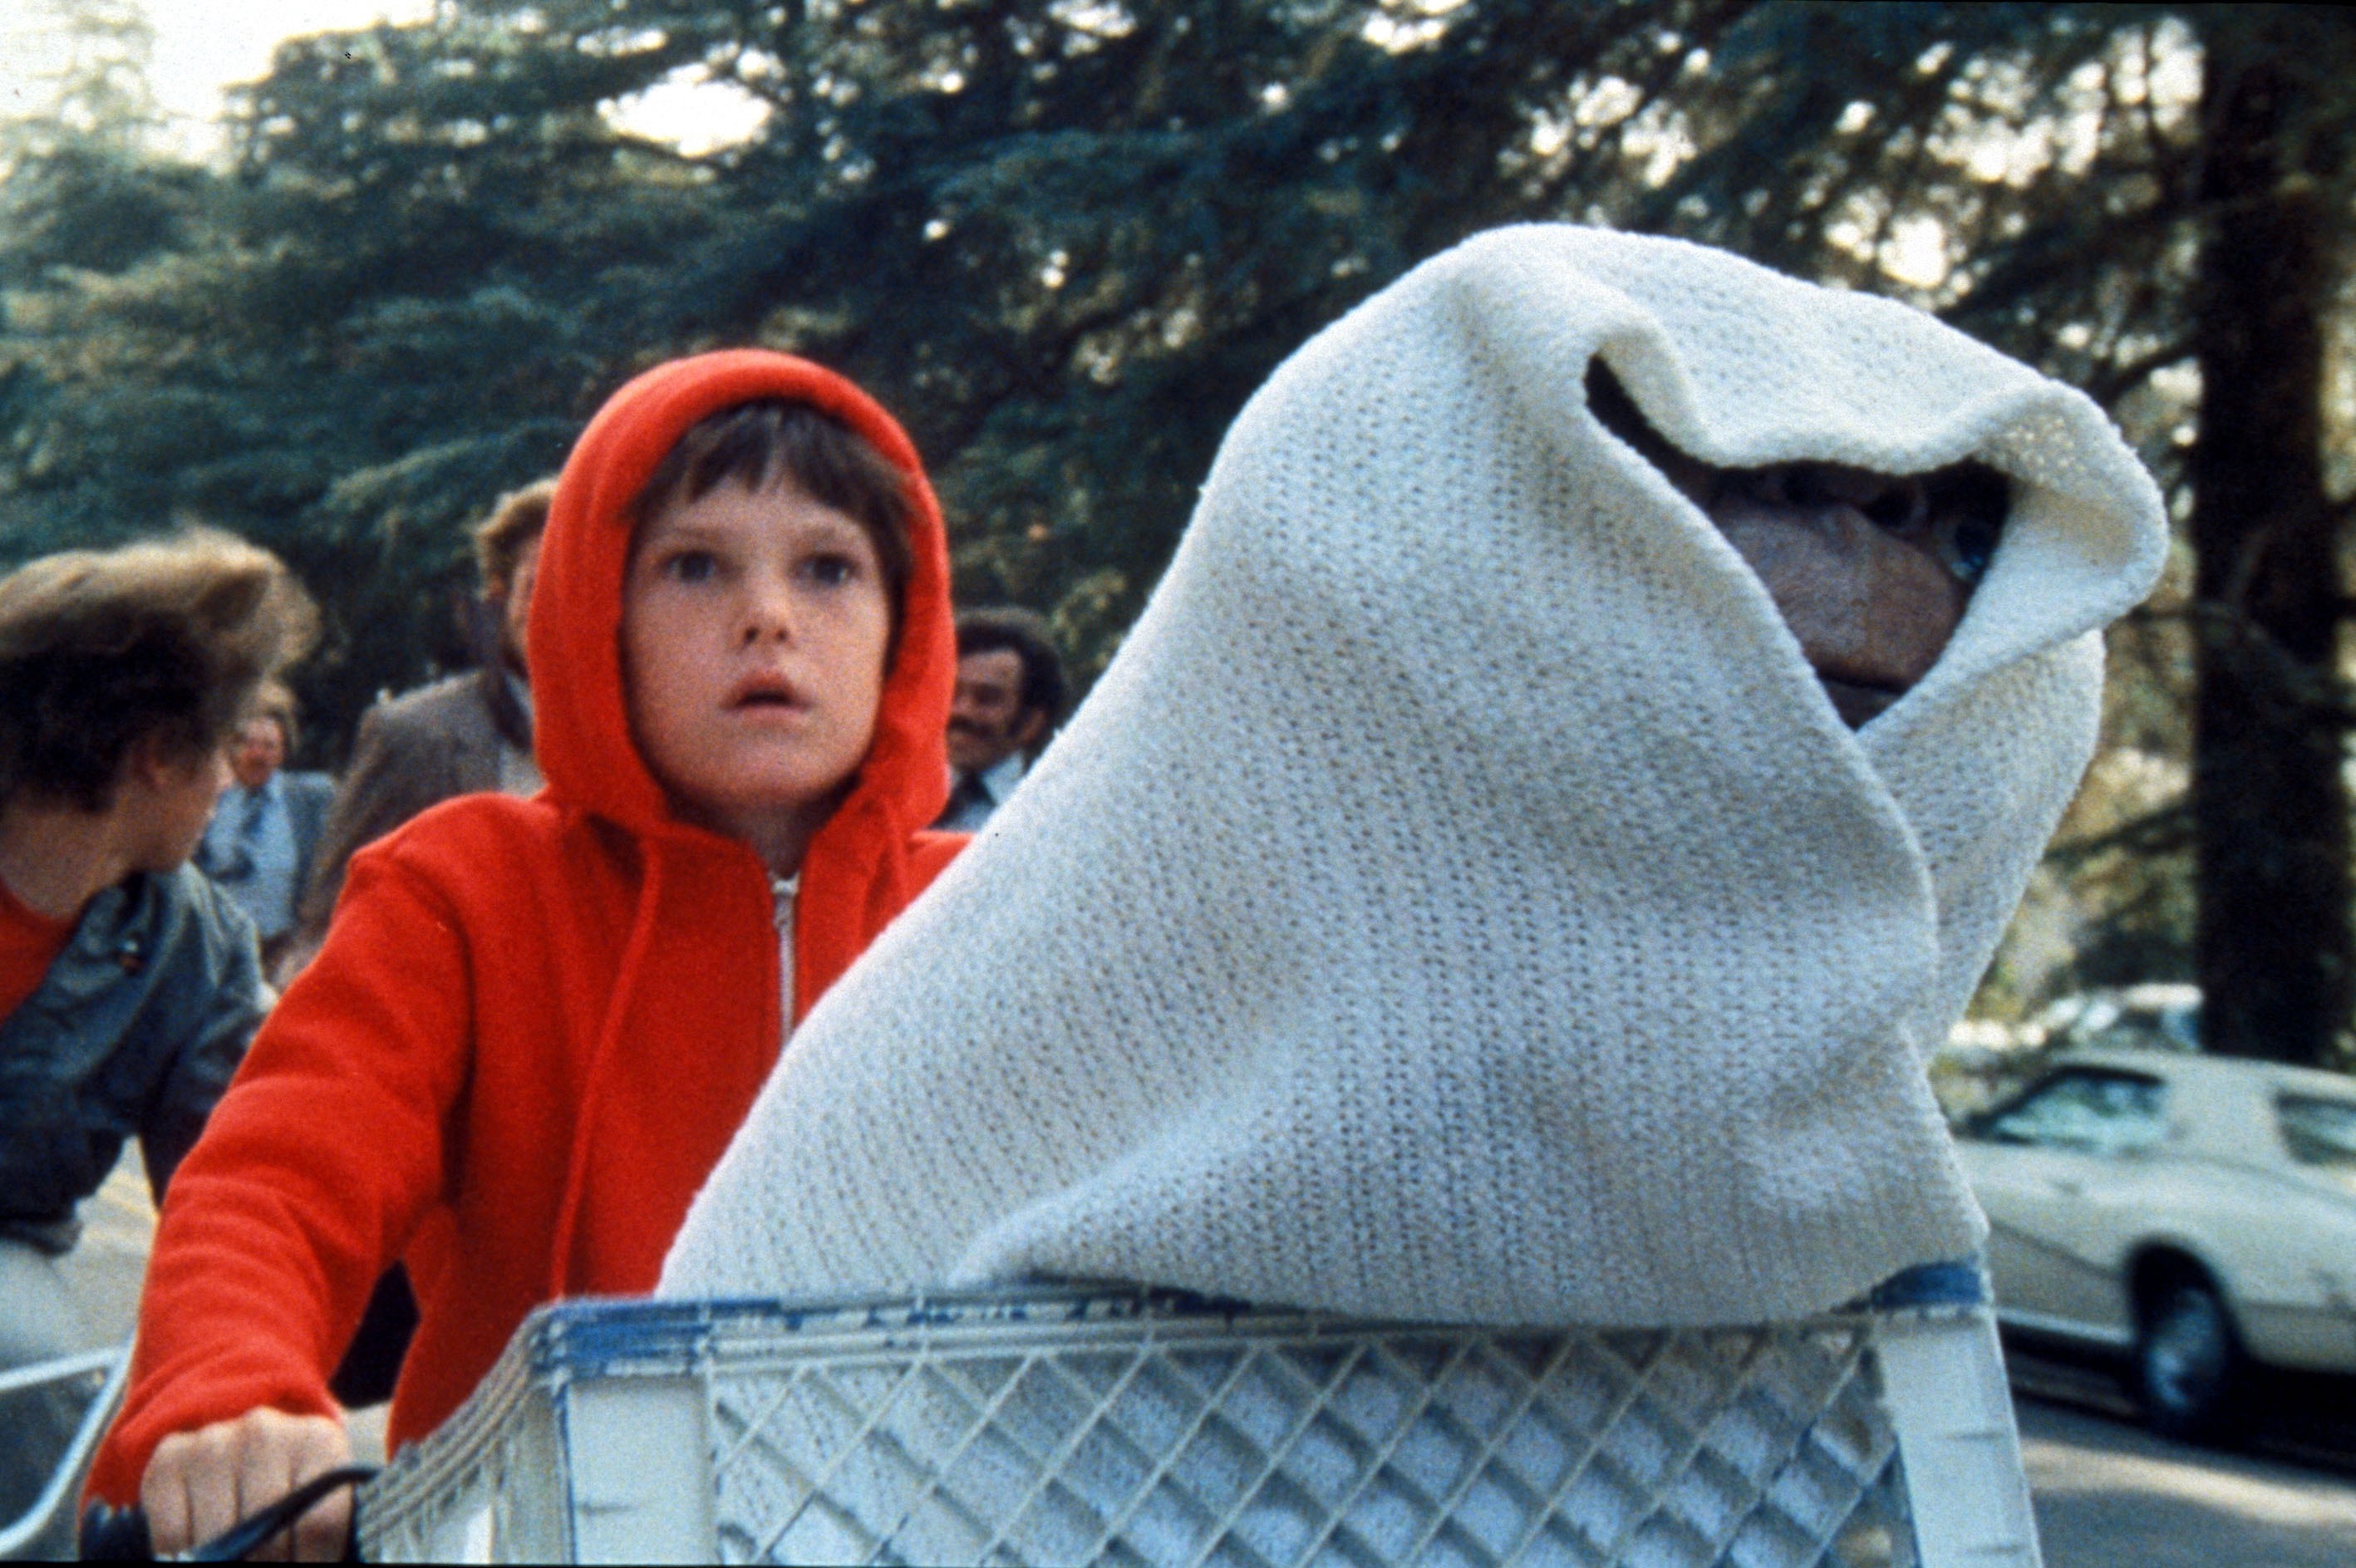 <p>Henry Thomas's ability to cry on cue helped him score the part of Elliott in "E.T. the Extra-Terrestrial," for which he earned a Golden Globe nomination for new male star of the year. He went on to star in movies like "Cloak & Dagger," "The Quest" and "Murder One."</p>